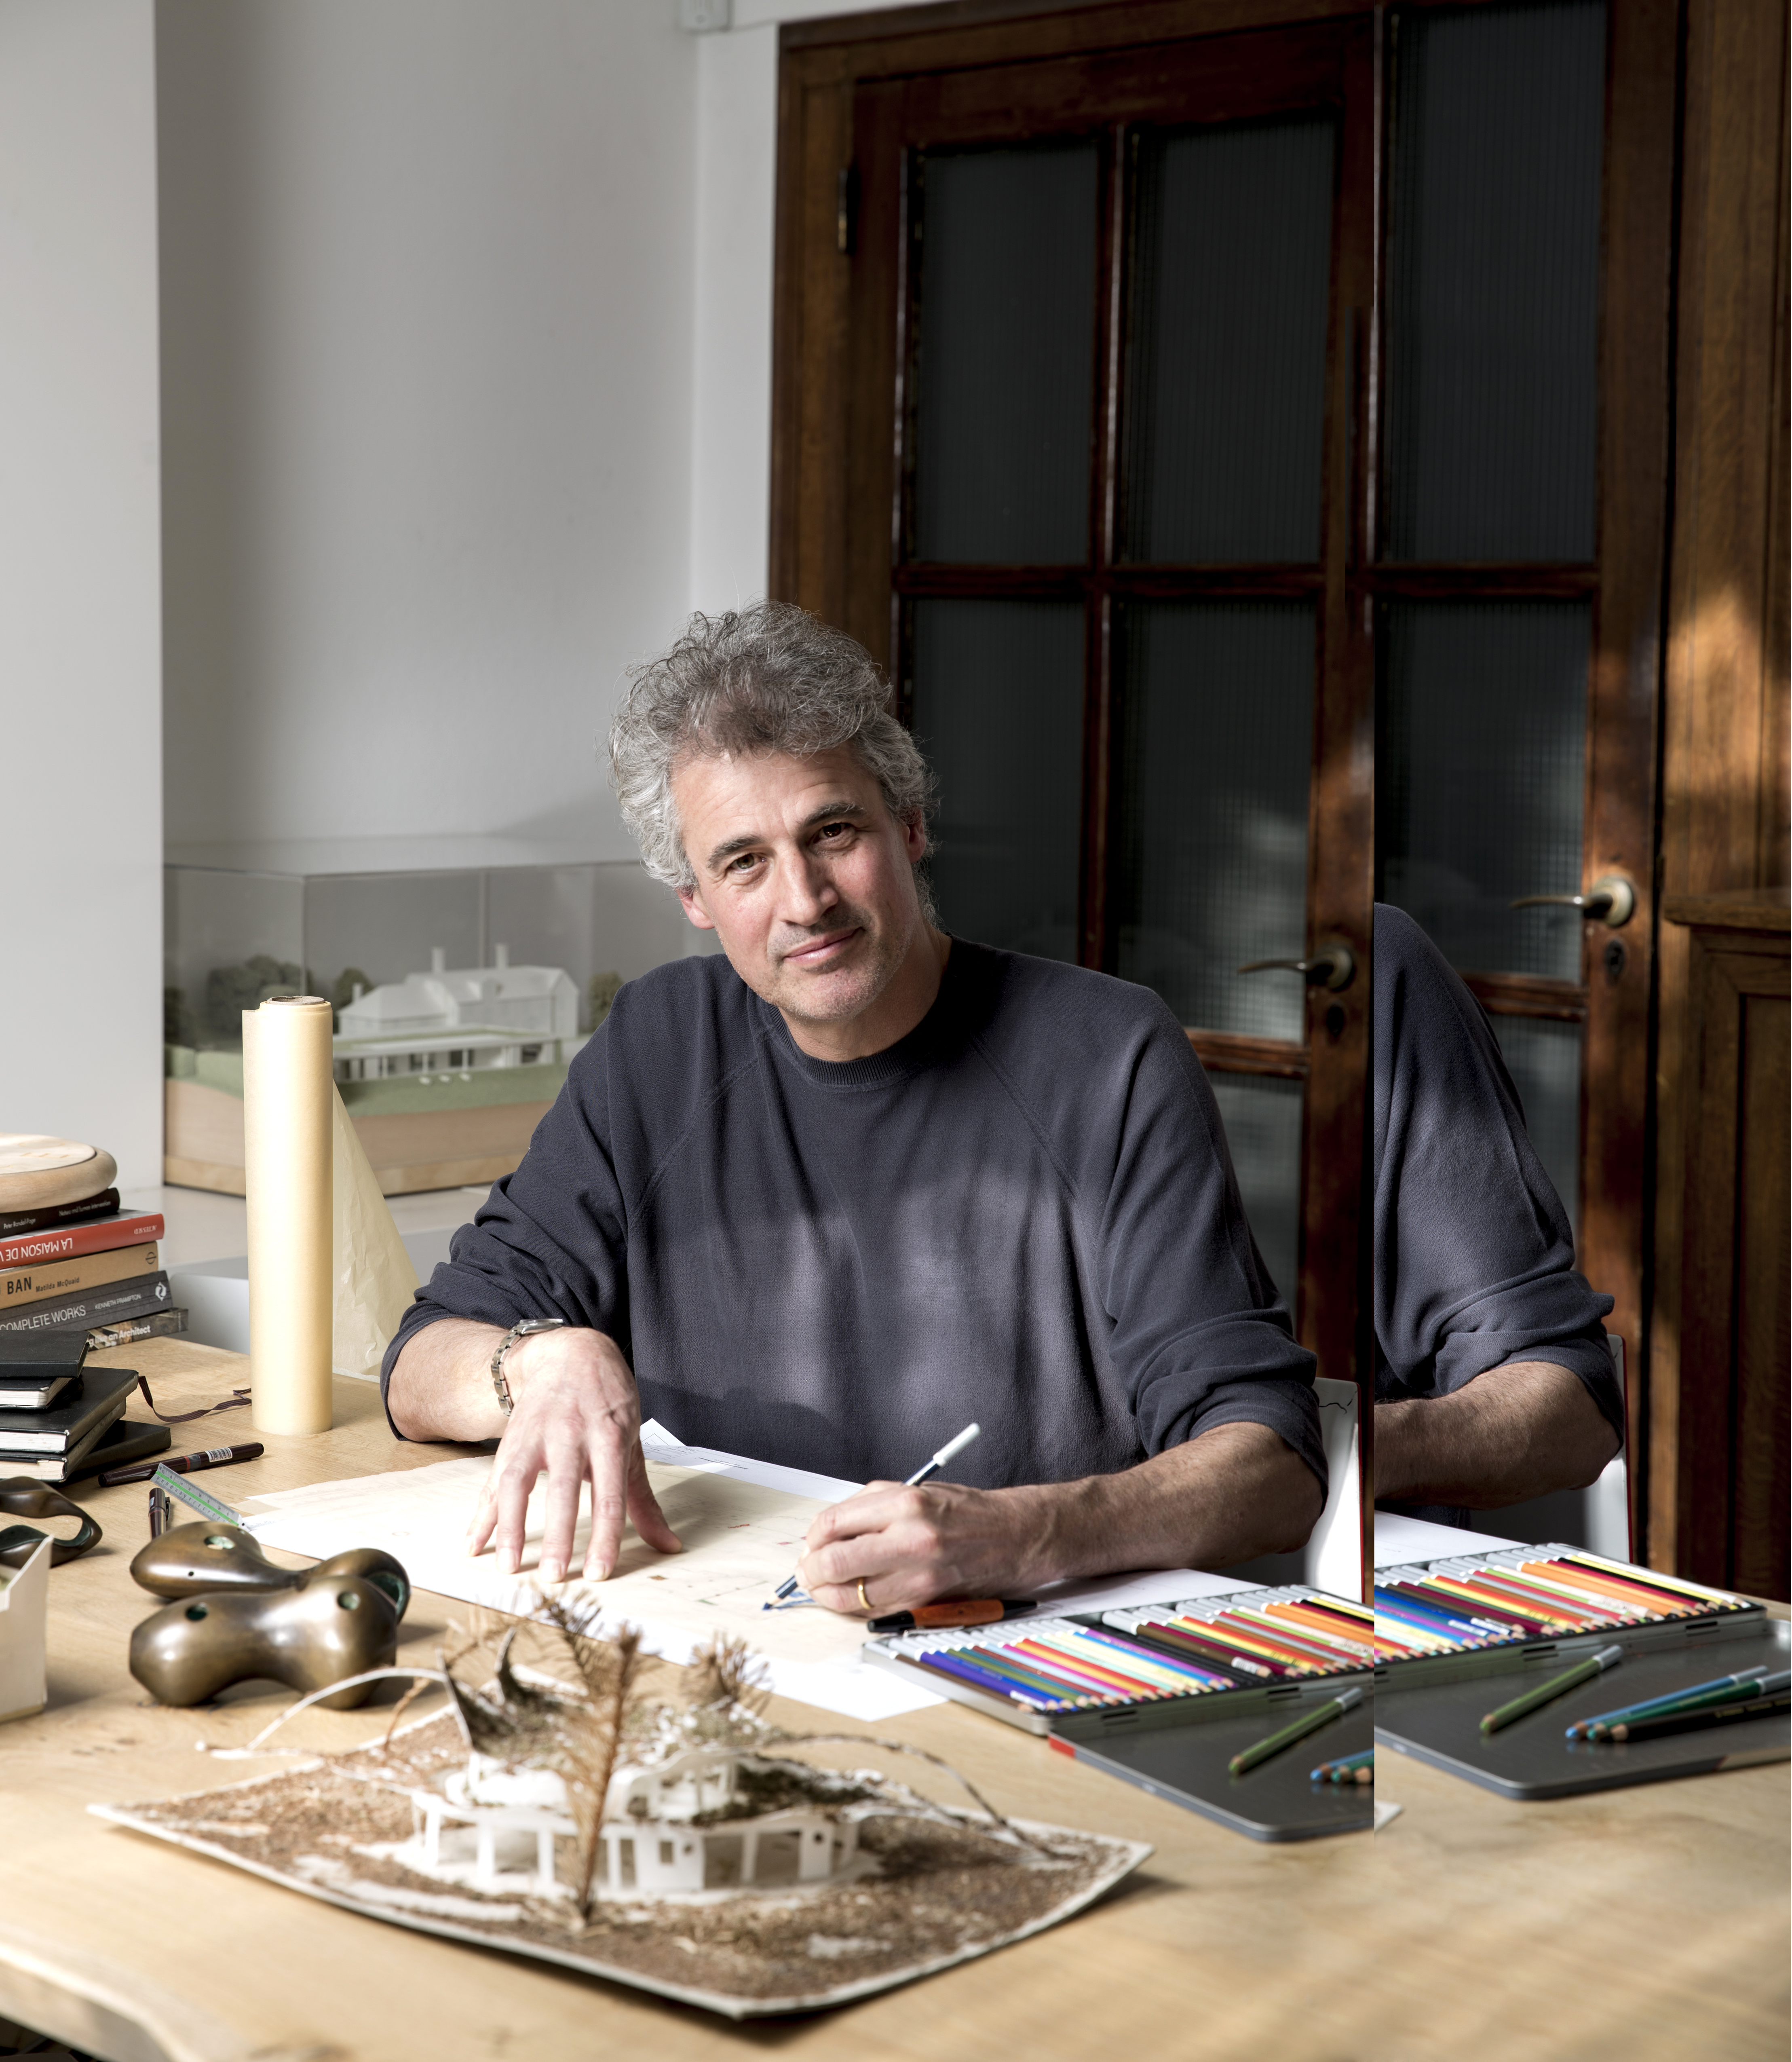 Alex Michaelis at his studio, photographed by Gemma Day